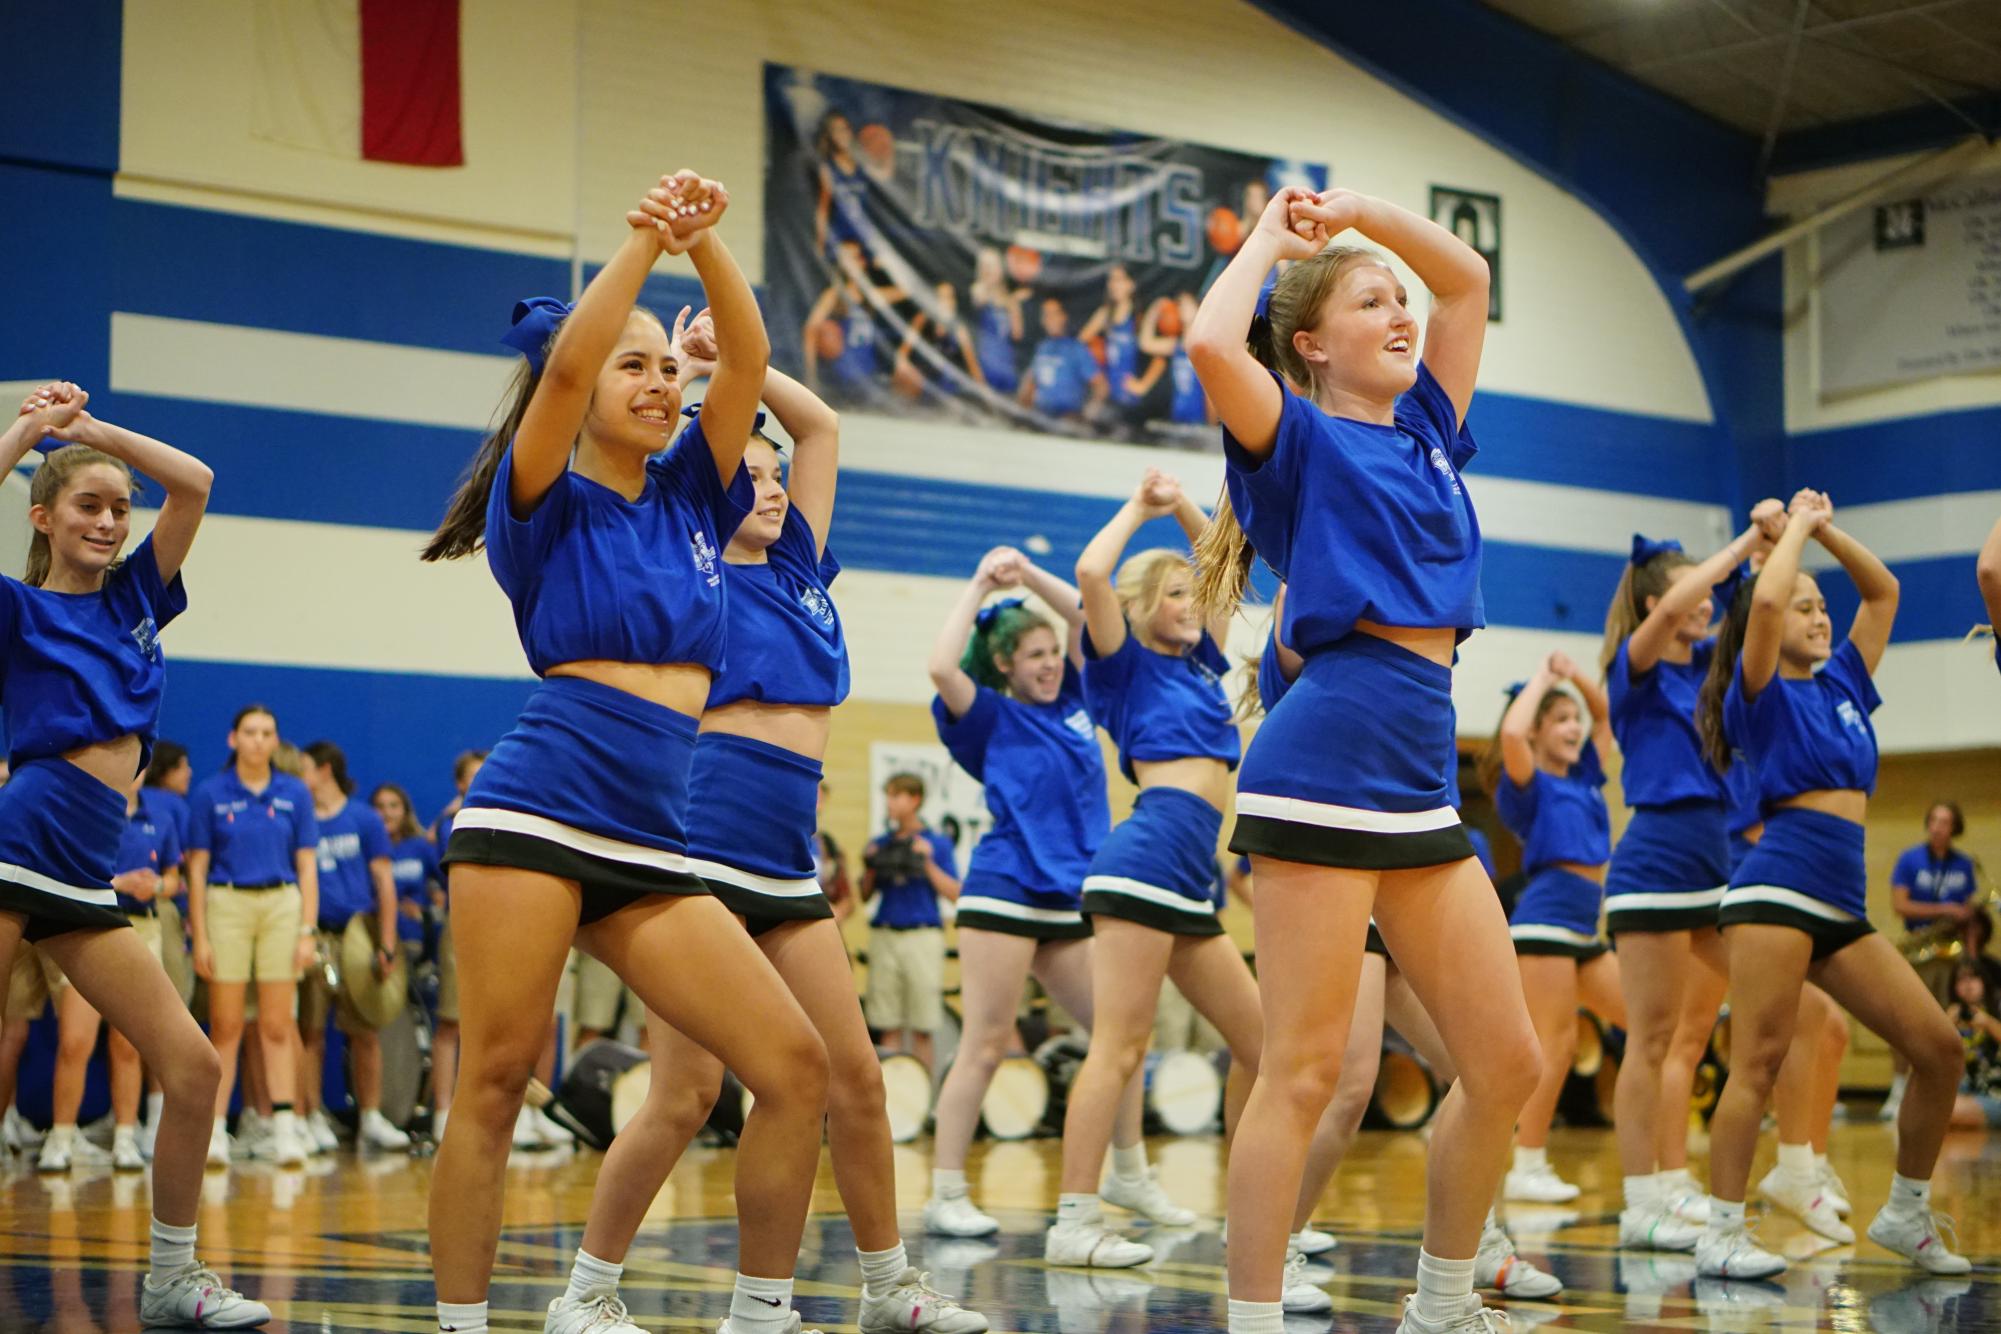 Senior captain Hannah Van Houten performs a routine with fellow cheerleaders during the pep rally before Taco Shack her junior year. Van Houten, pictured front, leads the routine. Caption and photo by Priya Thoppil.